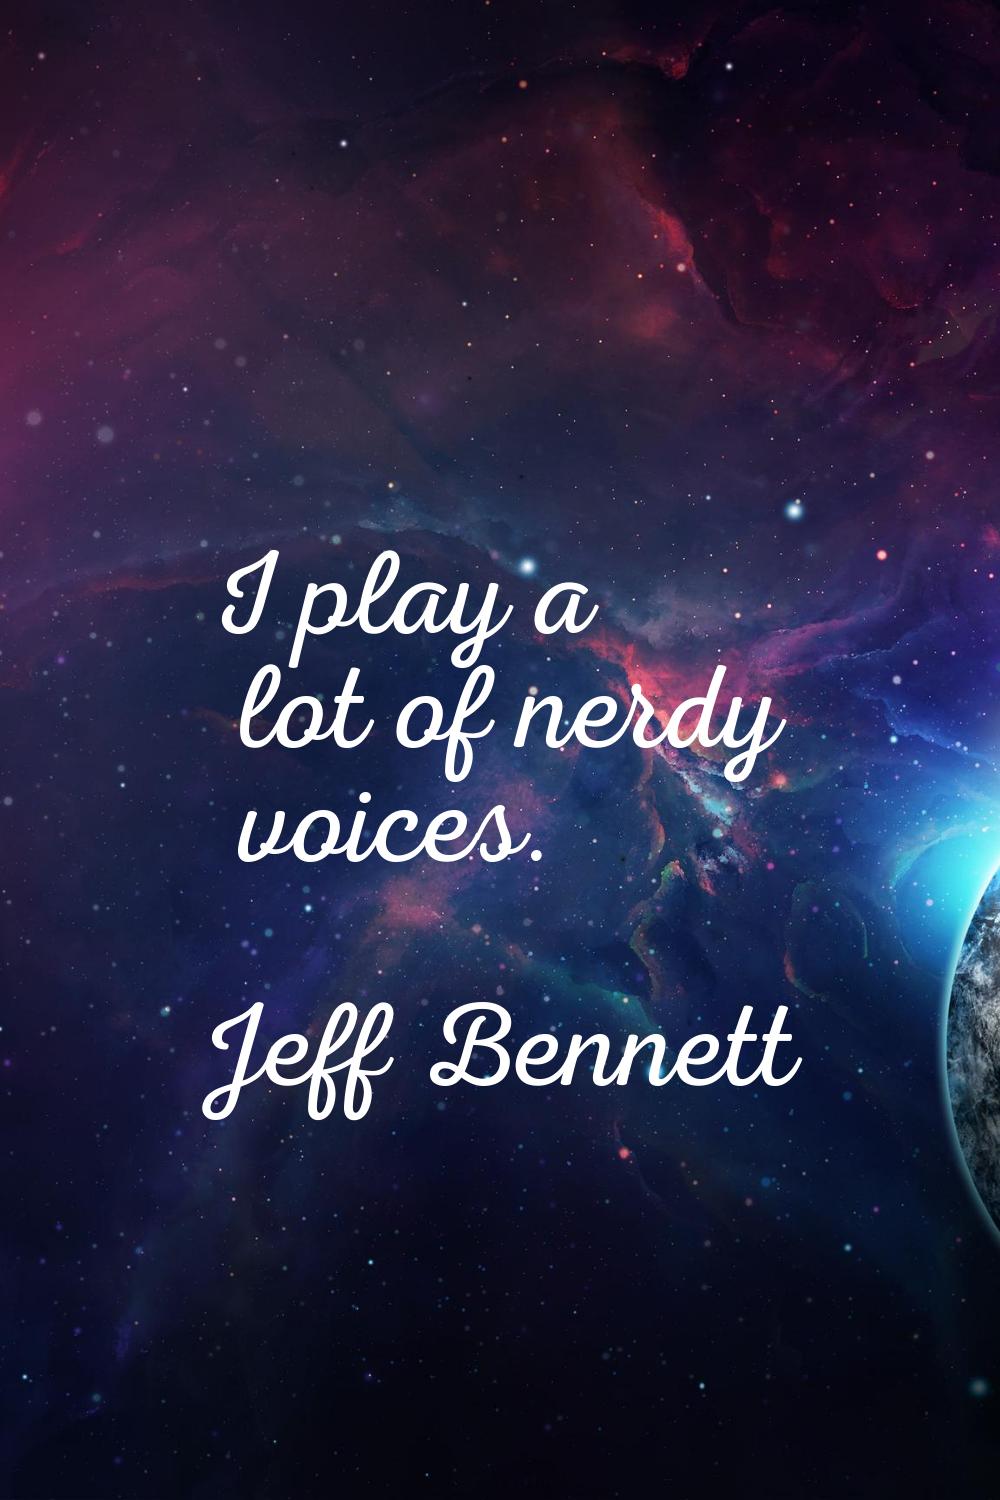 I play a lot of nerdy voices.